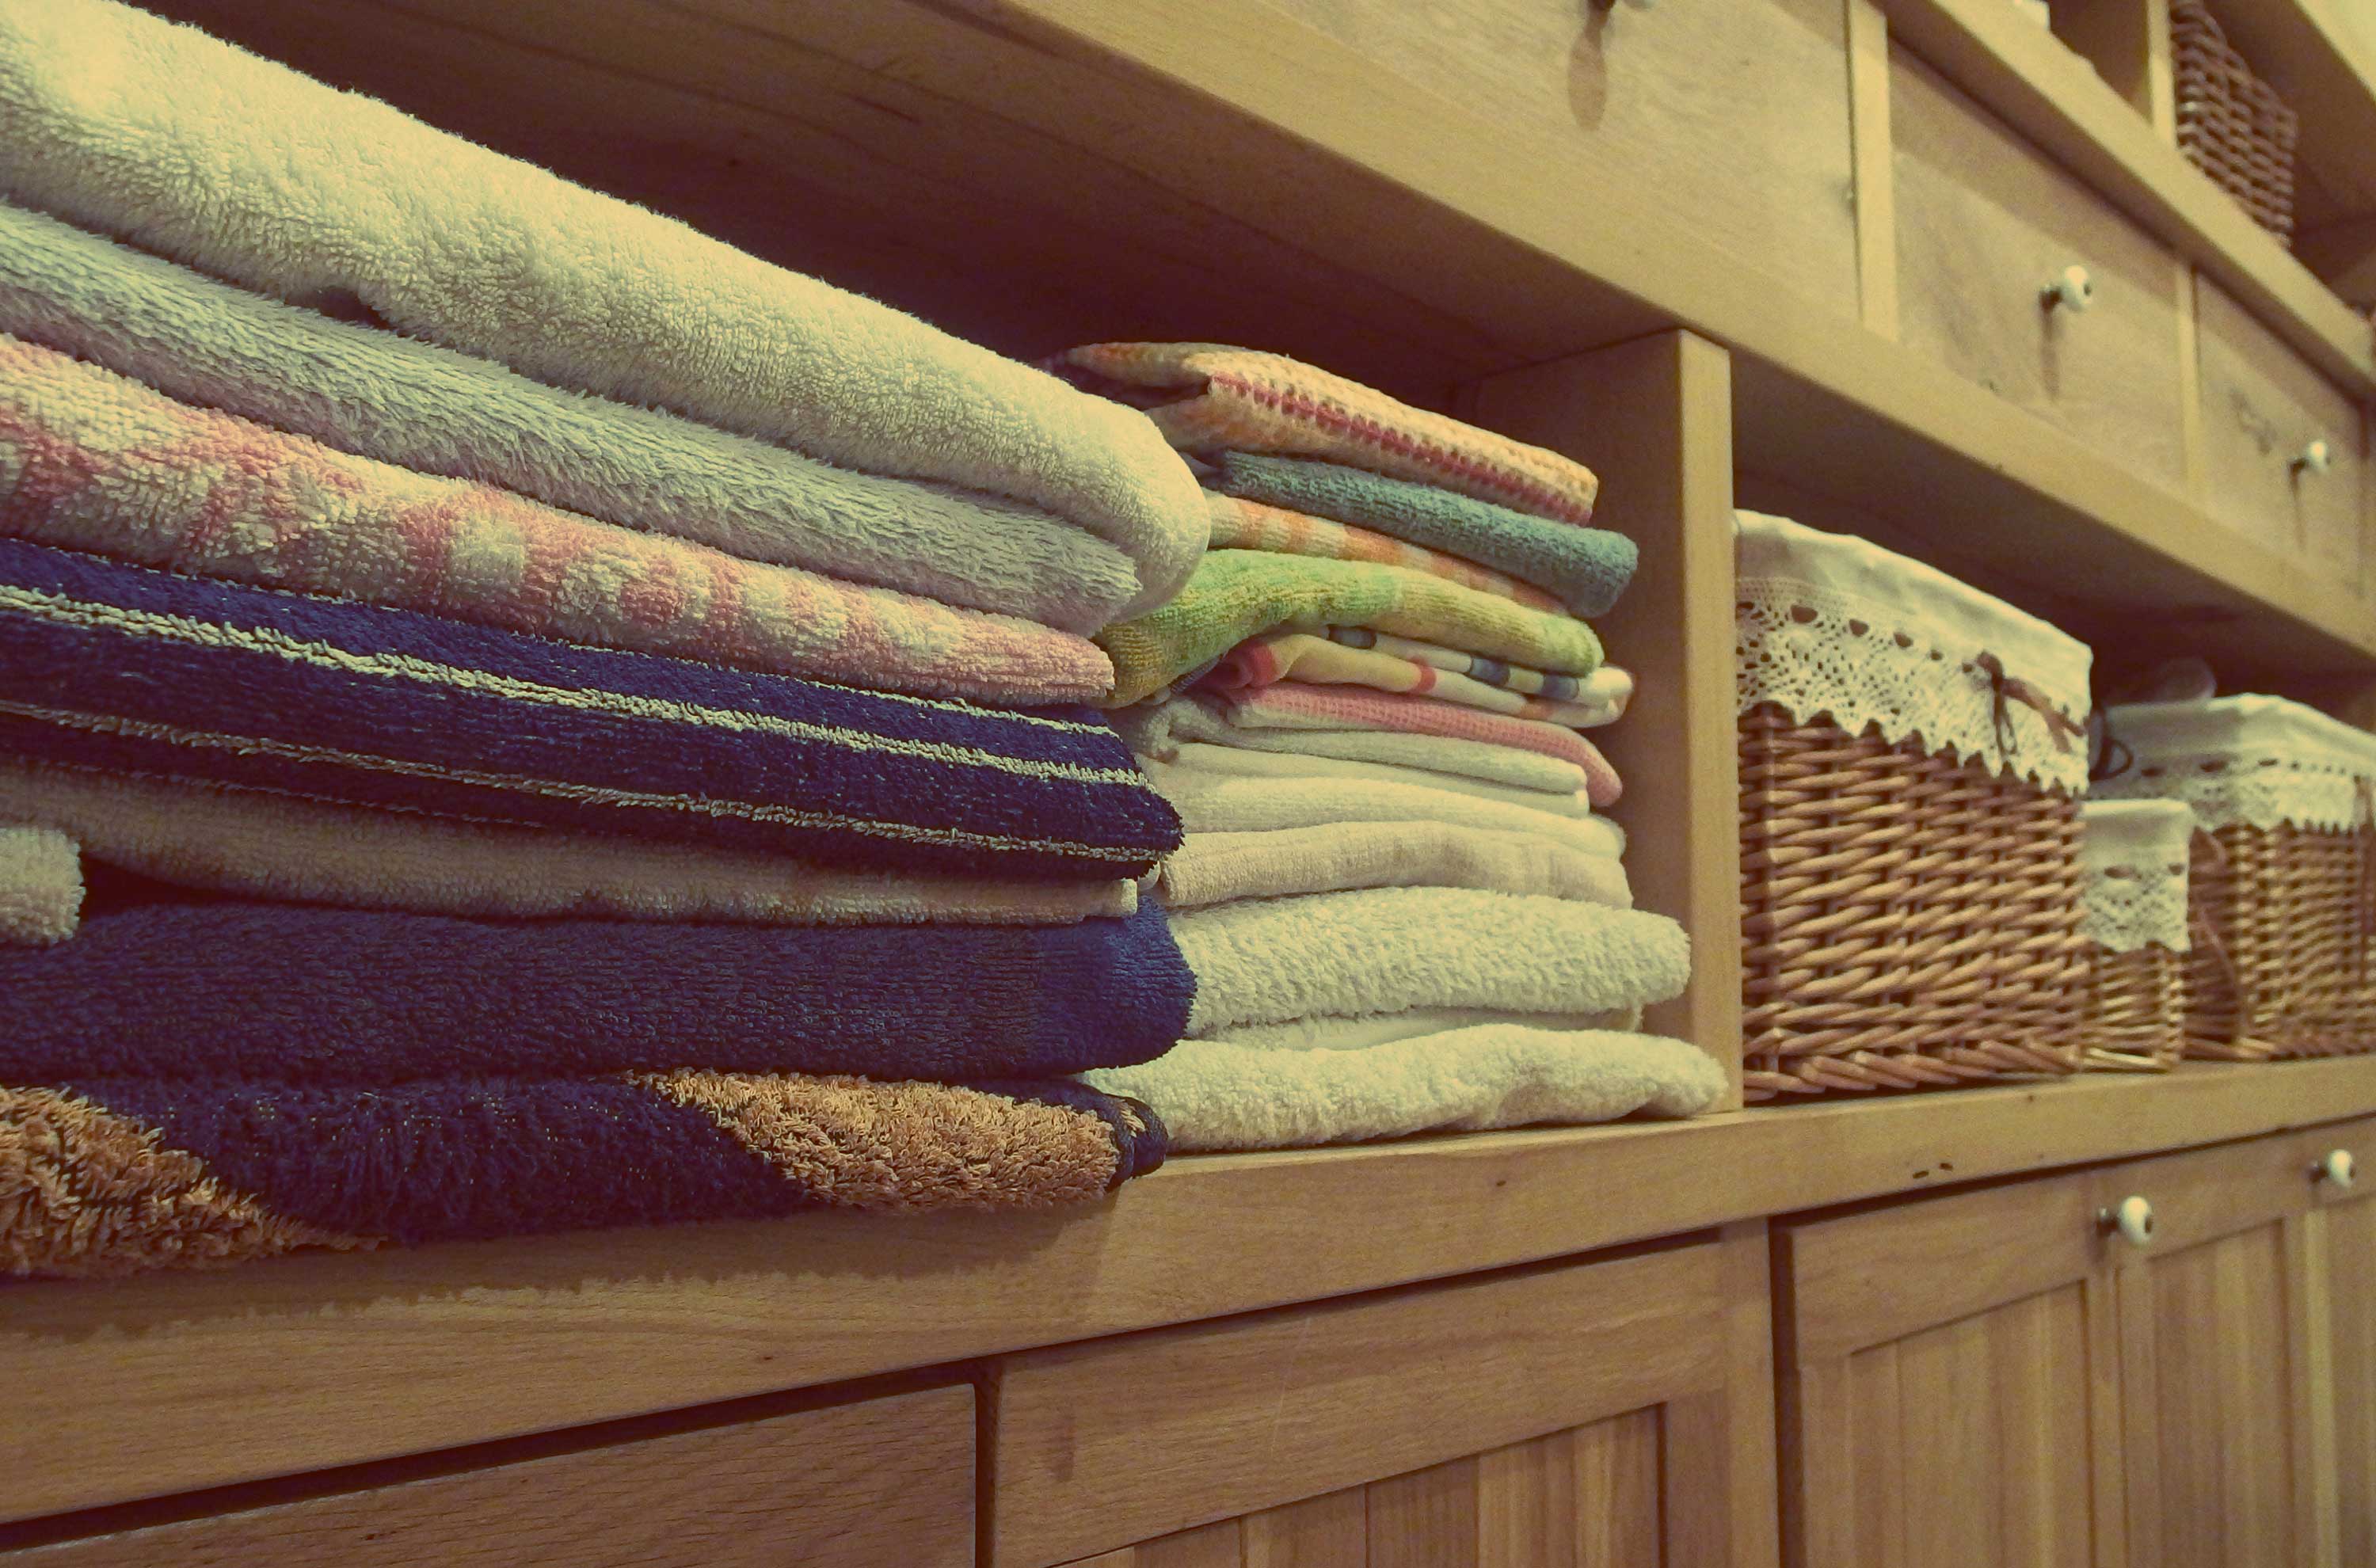 Sell your home -neatly folded towels and baskets